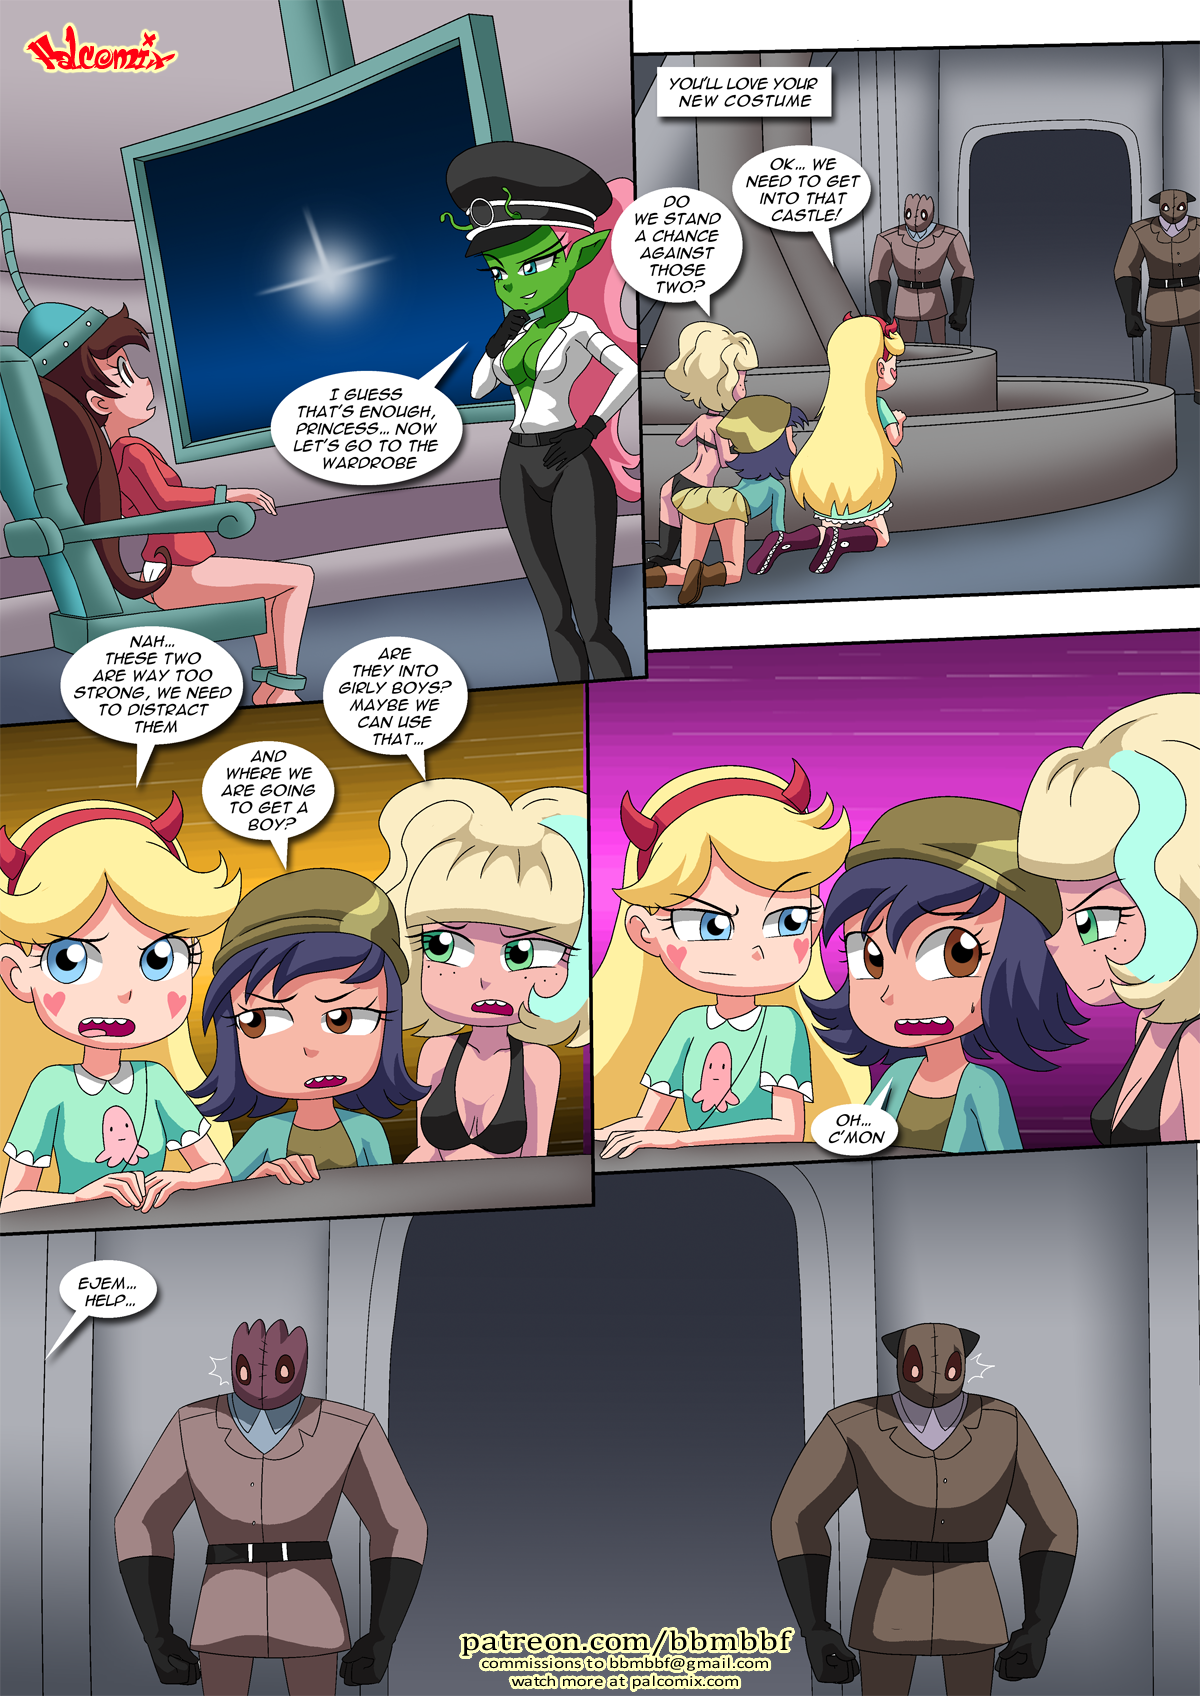 Saving Princess Marco porn comics Oral sex, Aliens, BDSM, Group Sex, Kidnapping, Lesbians, Lolicon, Sci-Fi, Sex Toys, Stockings, Straight Shota, Tentacles